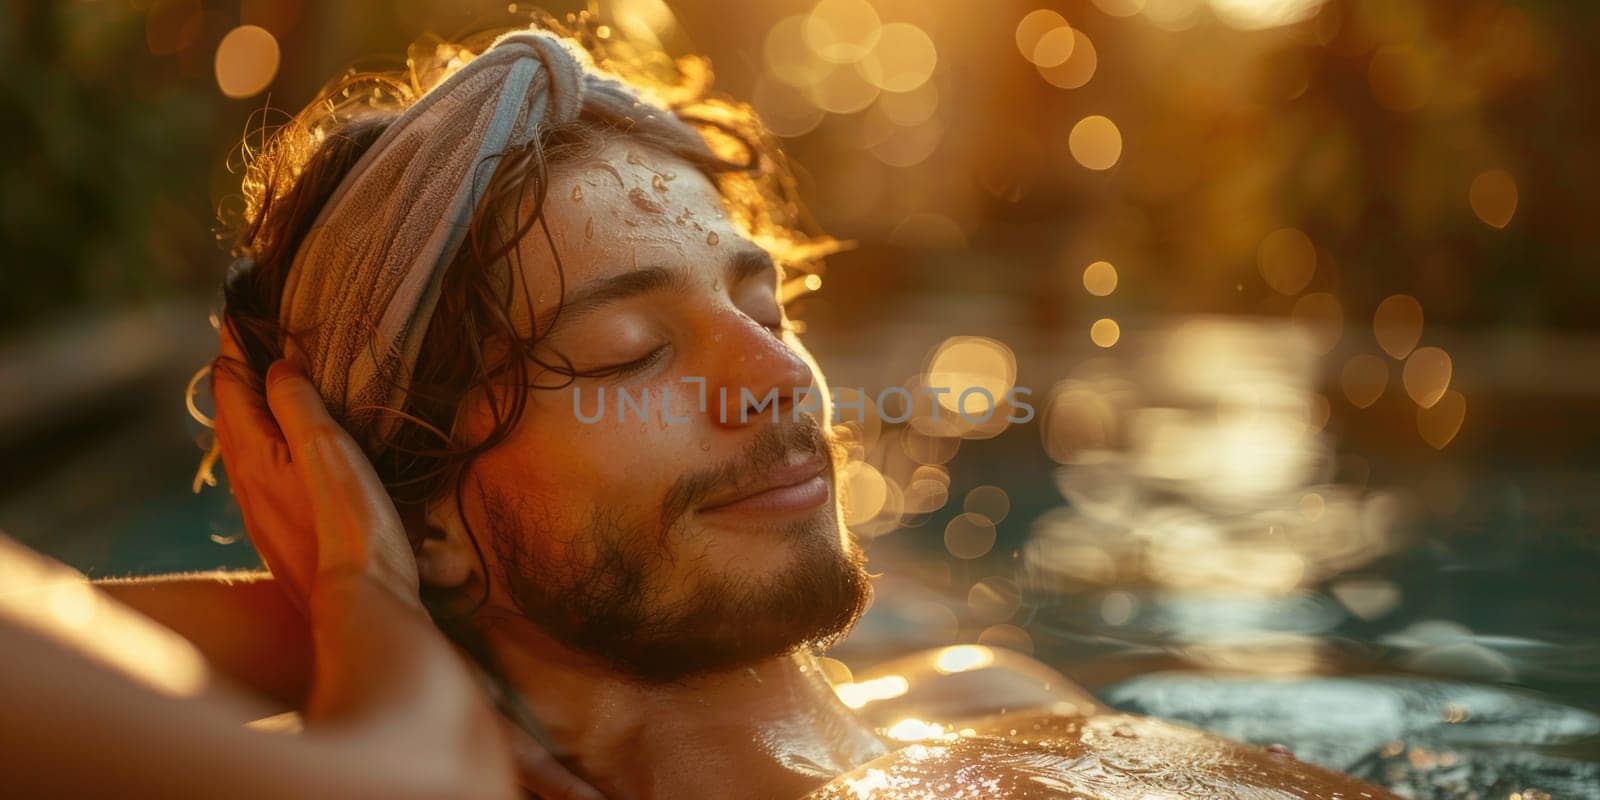 Man in Water Holding Head in Hands by but_photo